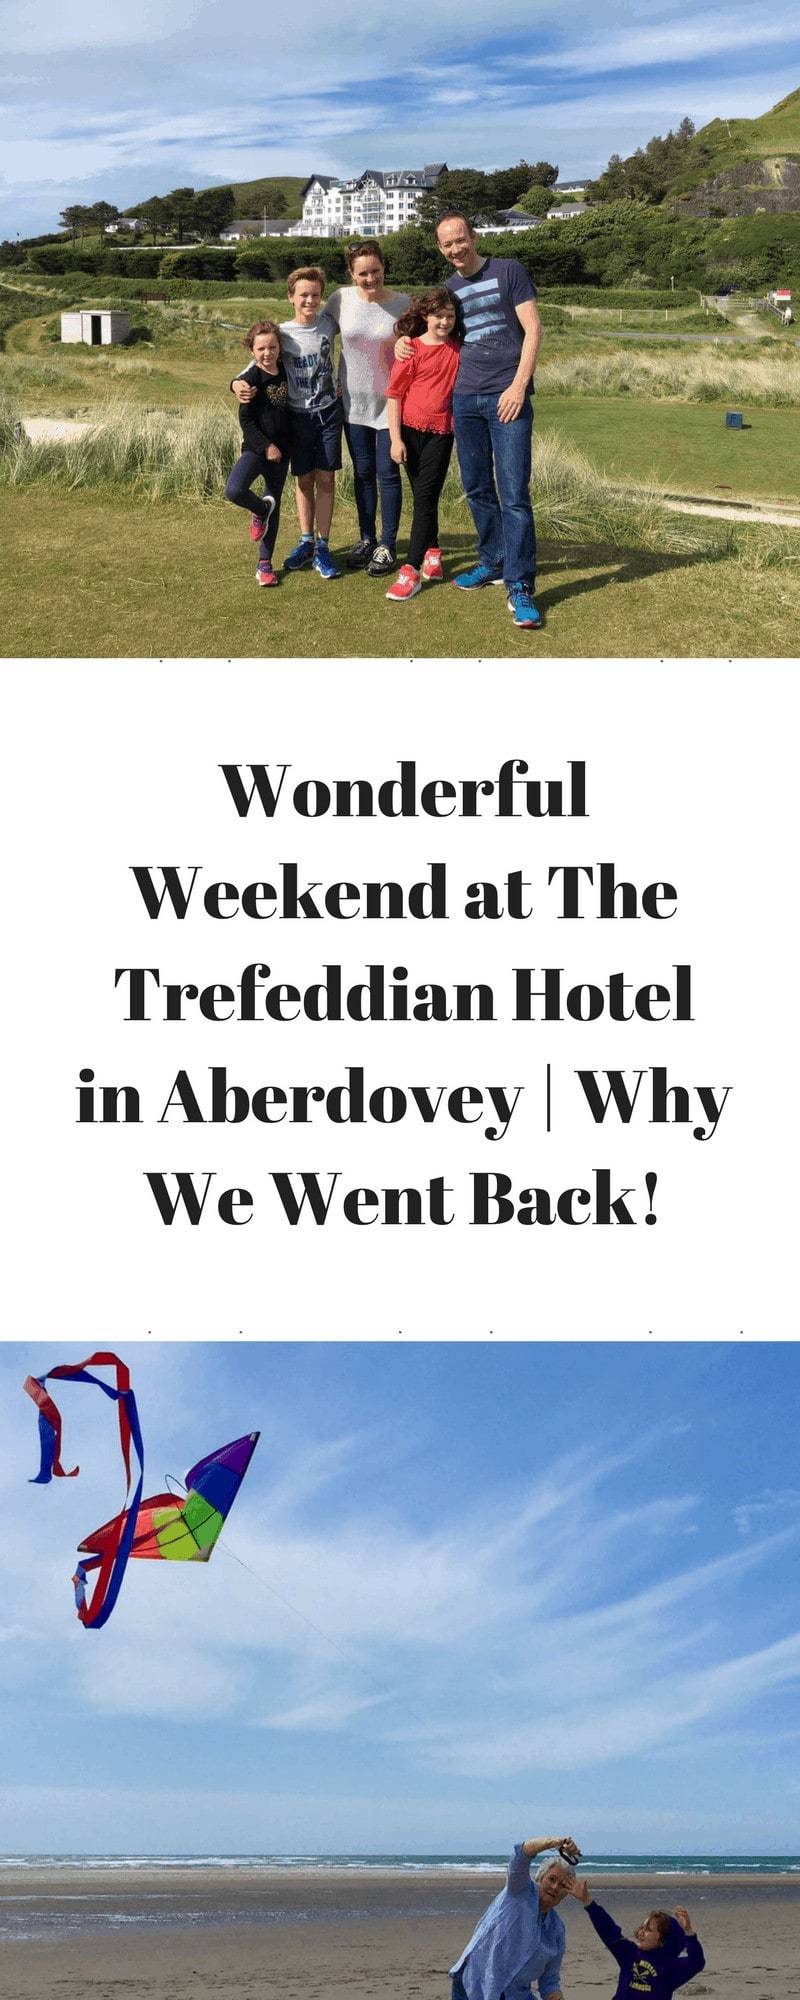 Wonderful Weekend at The Trefeddian Hotel in Aberdovey | Why We Went Back! www.minitravellers.co.uk